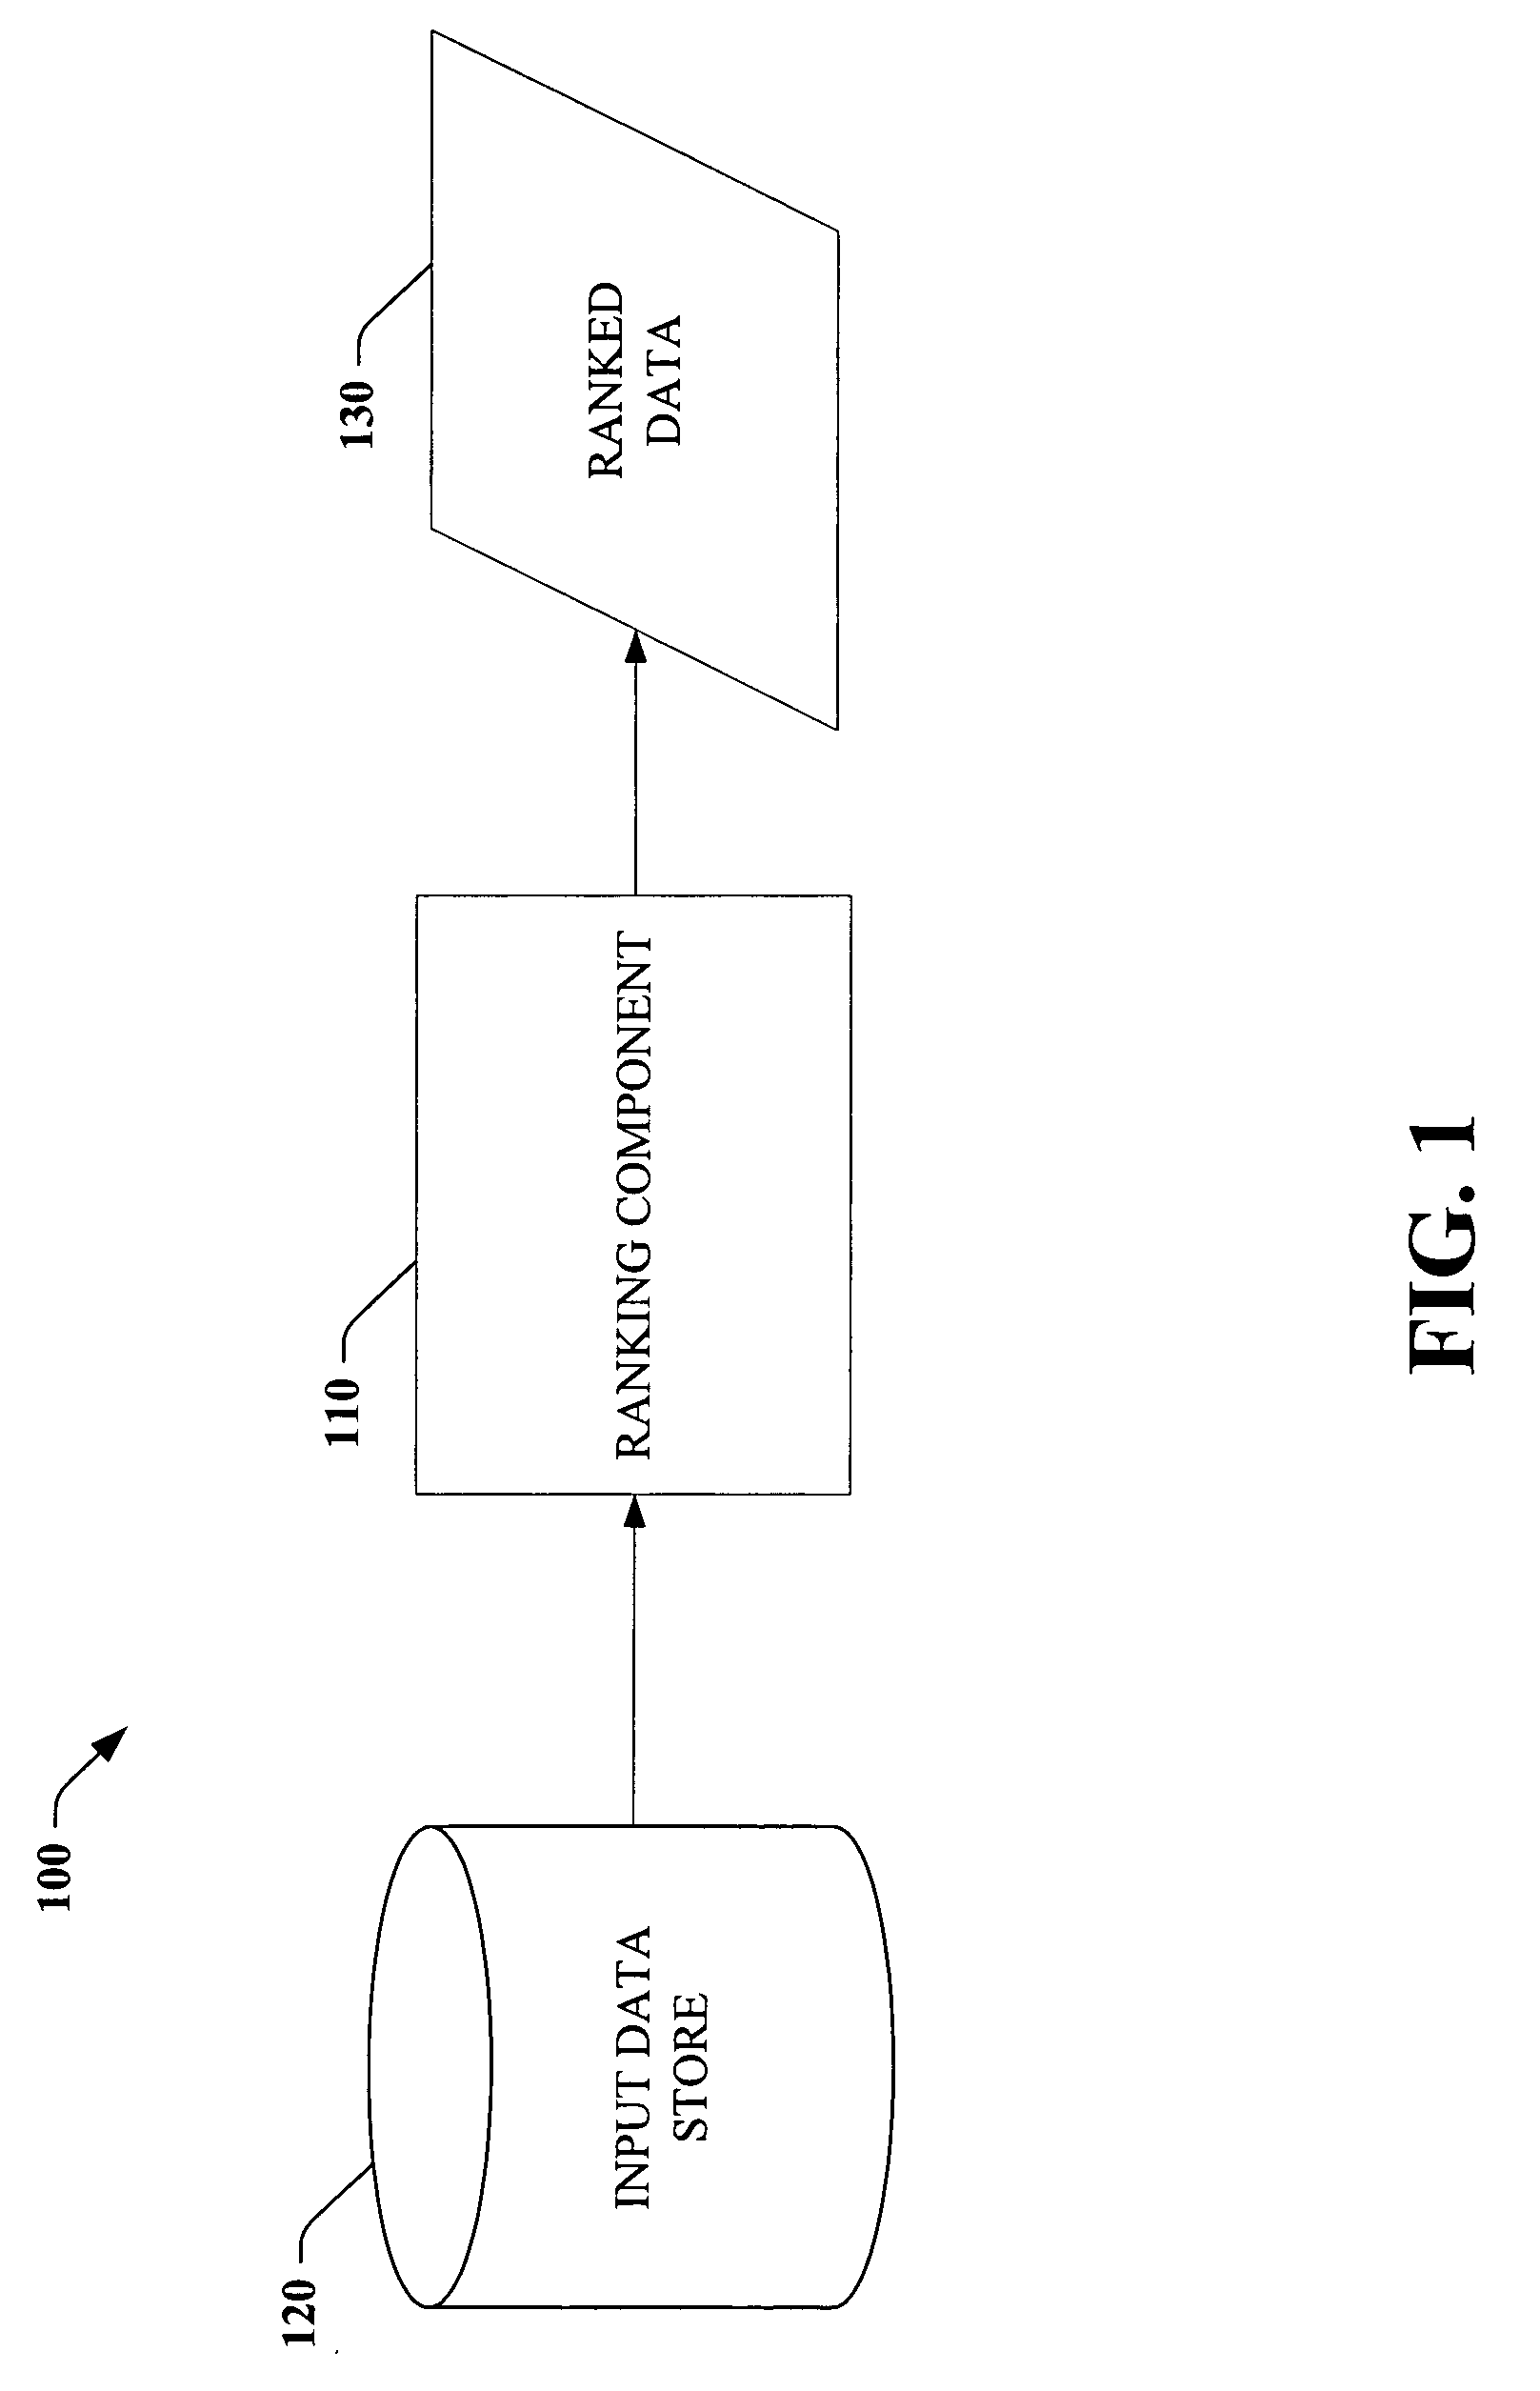 System and method for learning ranking functions on data